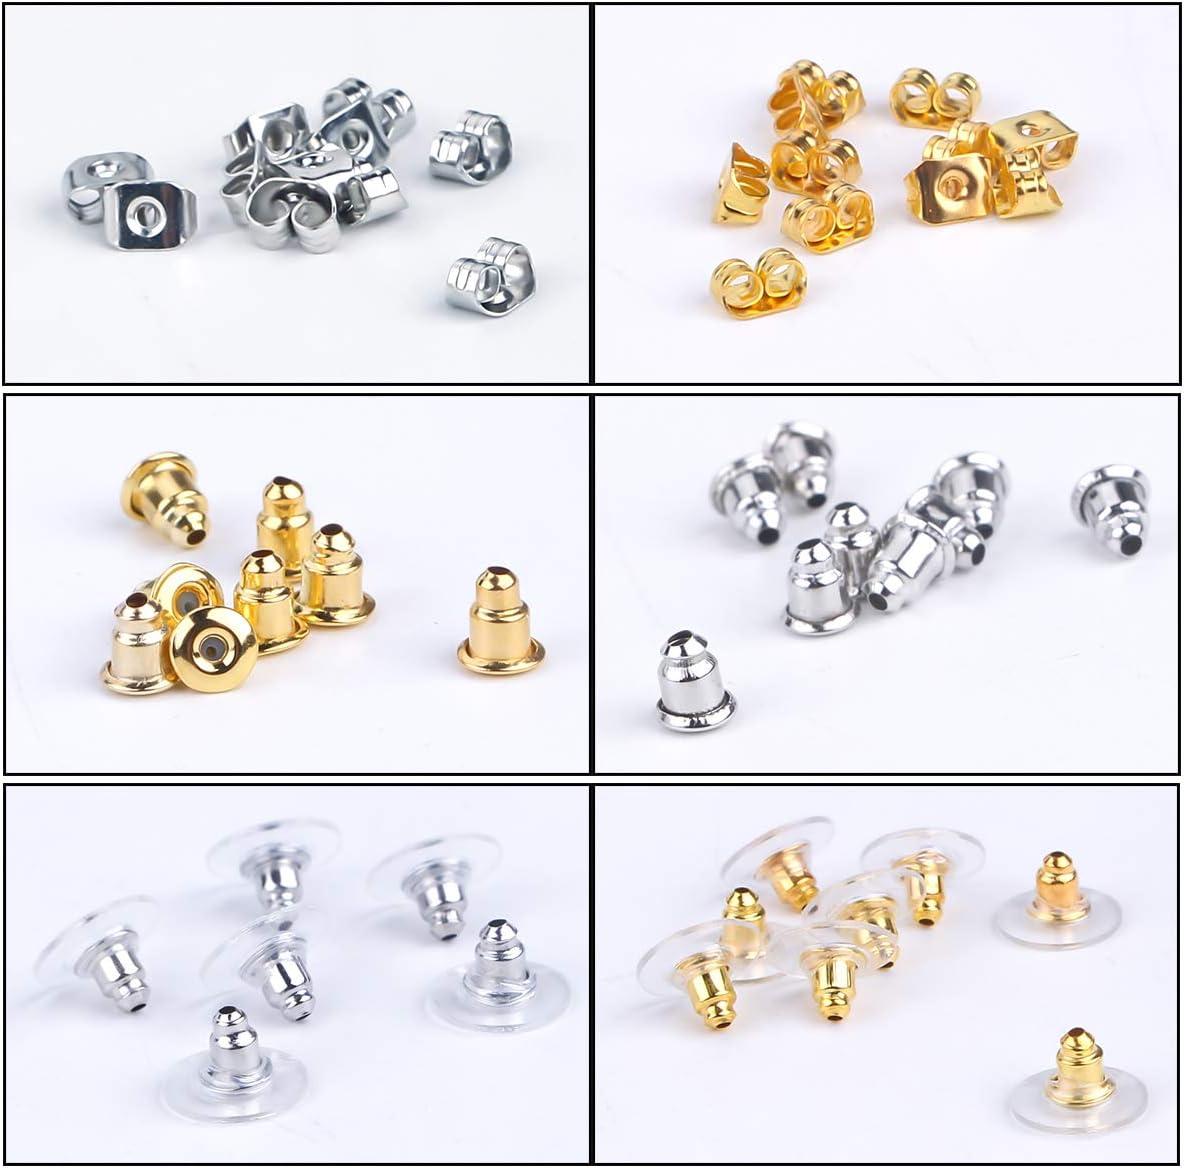  Earring Backs 10 Styles Earring Accessories Safety Bullet  Earring Clutch Hypoallergenic 1040 Pieces (10 Styles) : Arts, Crafts &  Sewing